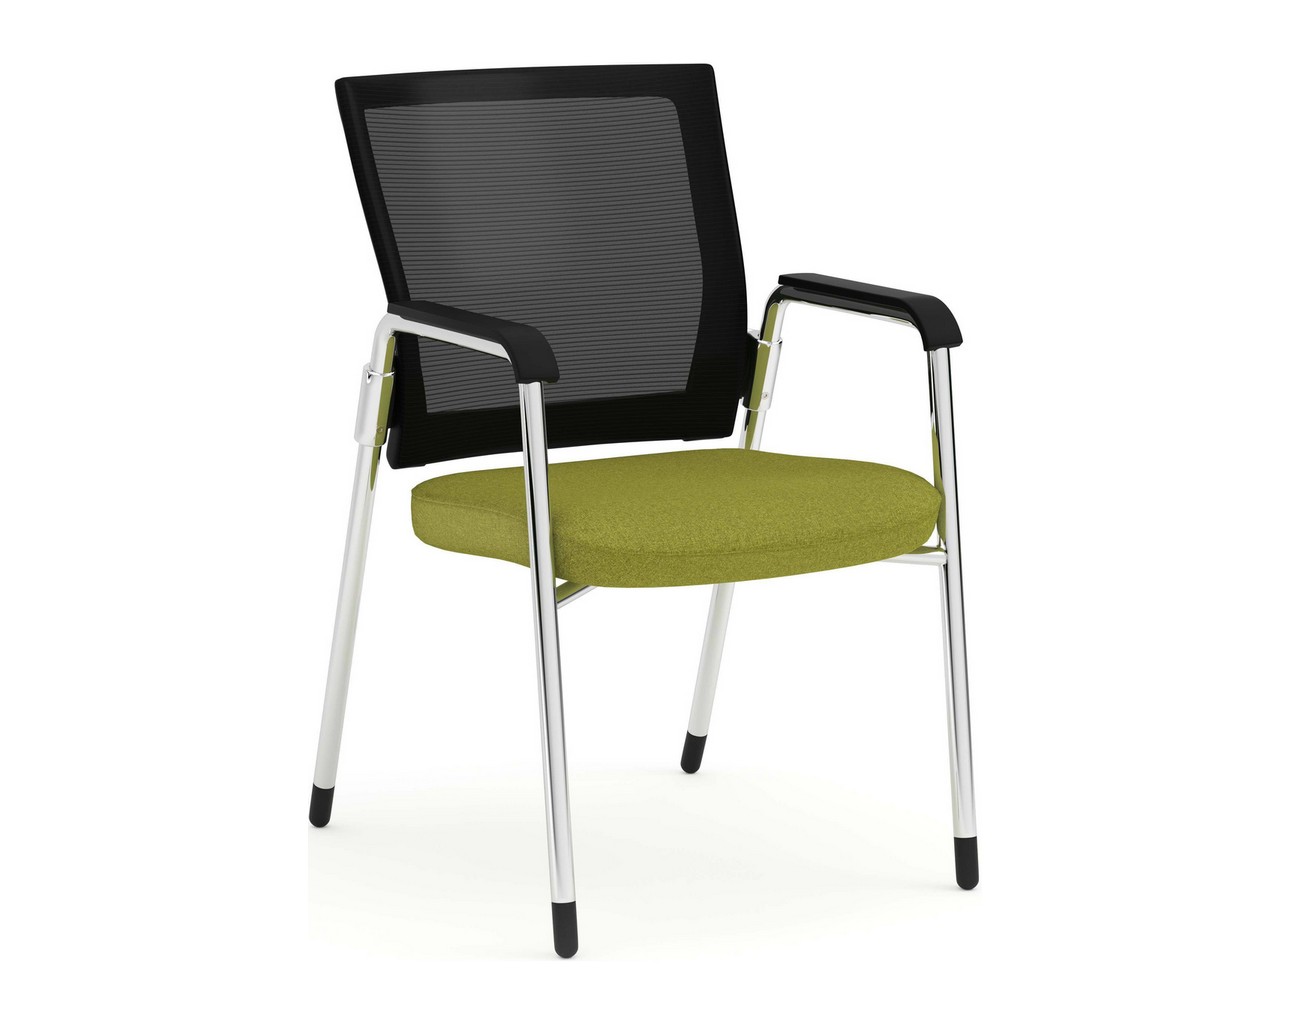 Propel Guest Chair – Black Mesh Back with Green Seat